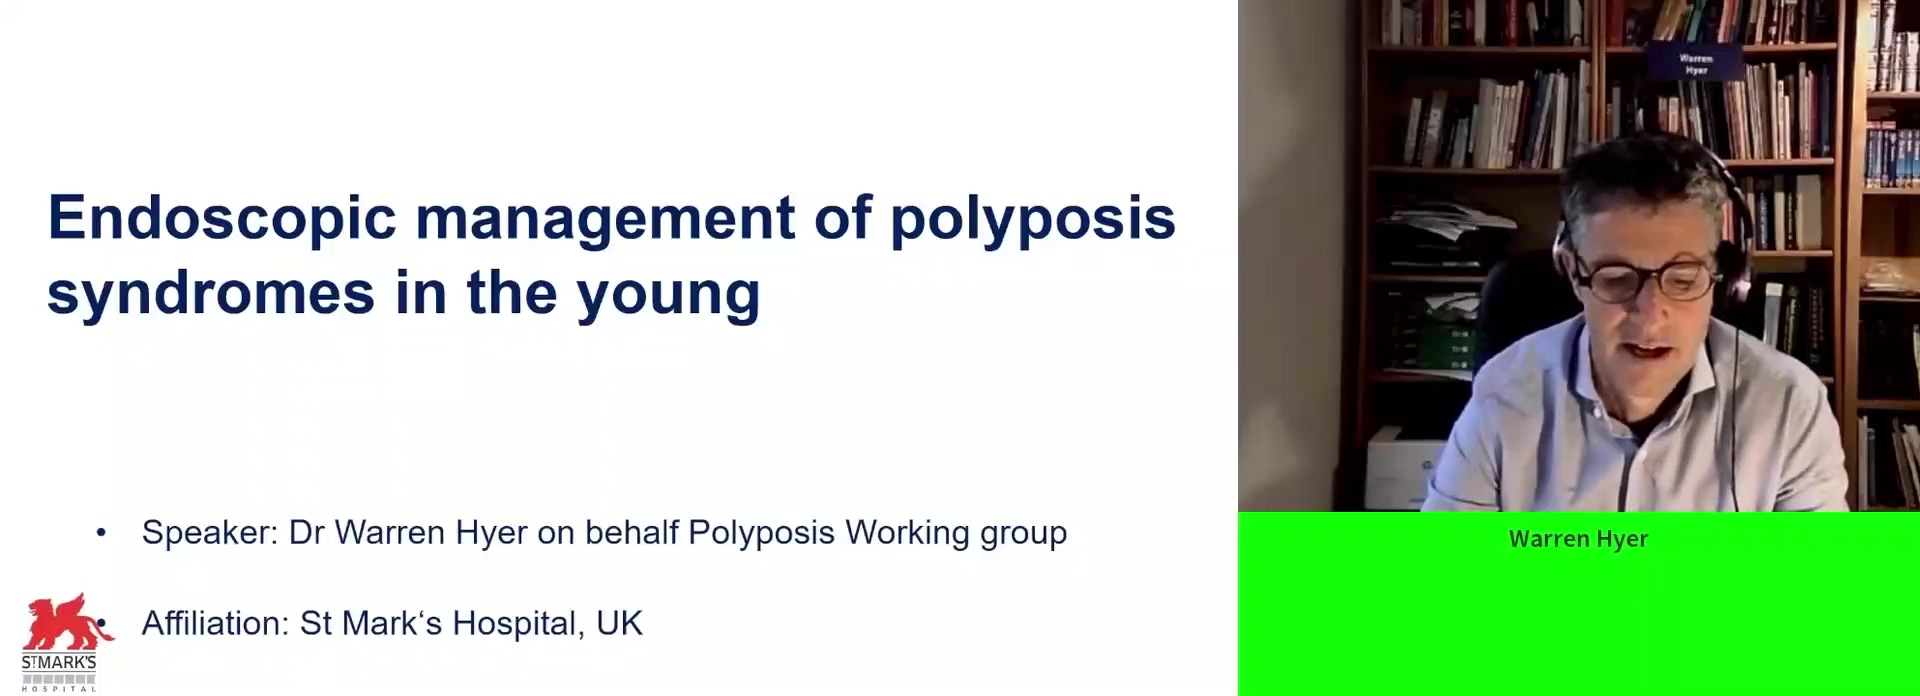 Guideline on endscopic management of polyposis syndromes in the young (ESPGHAN)